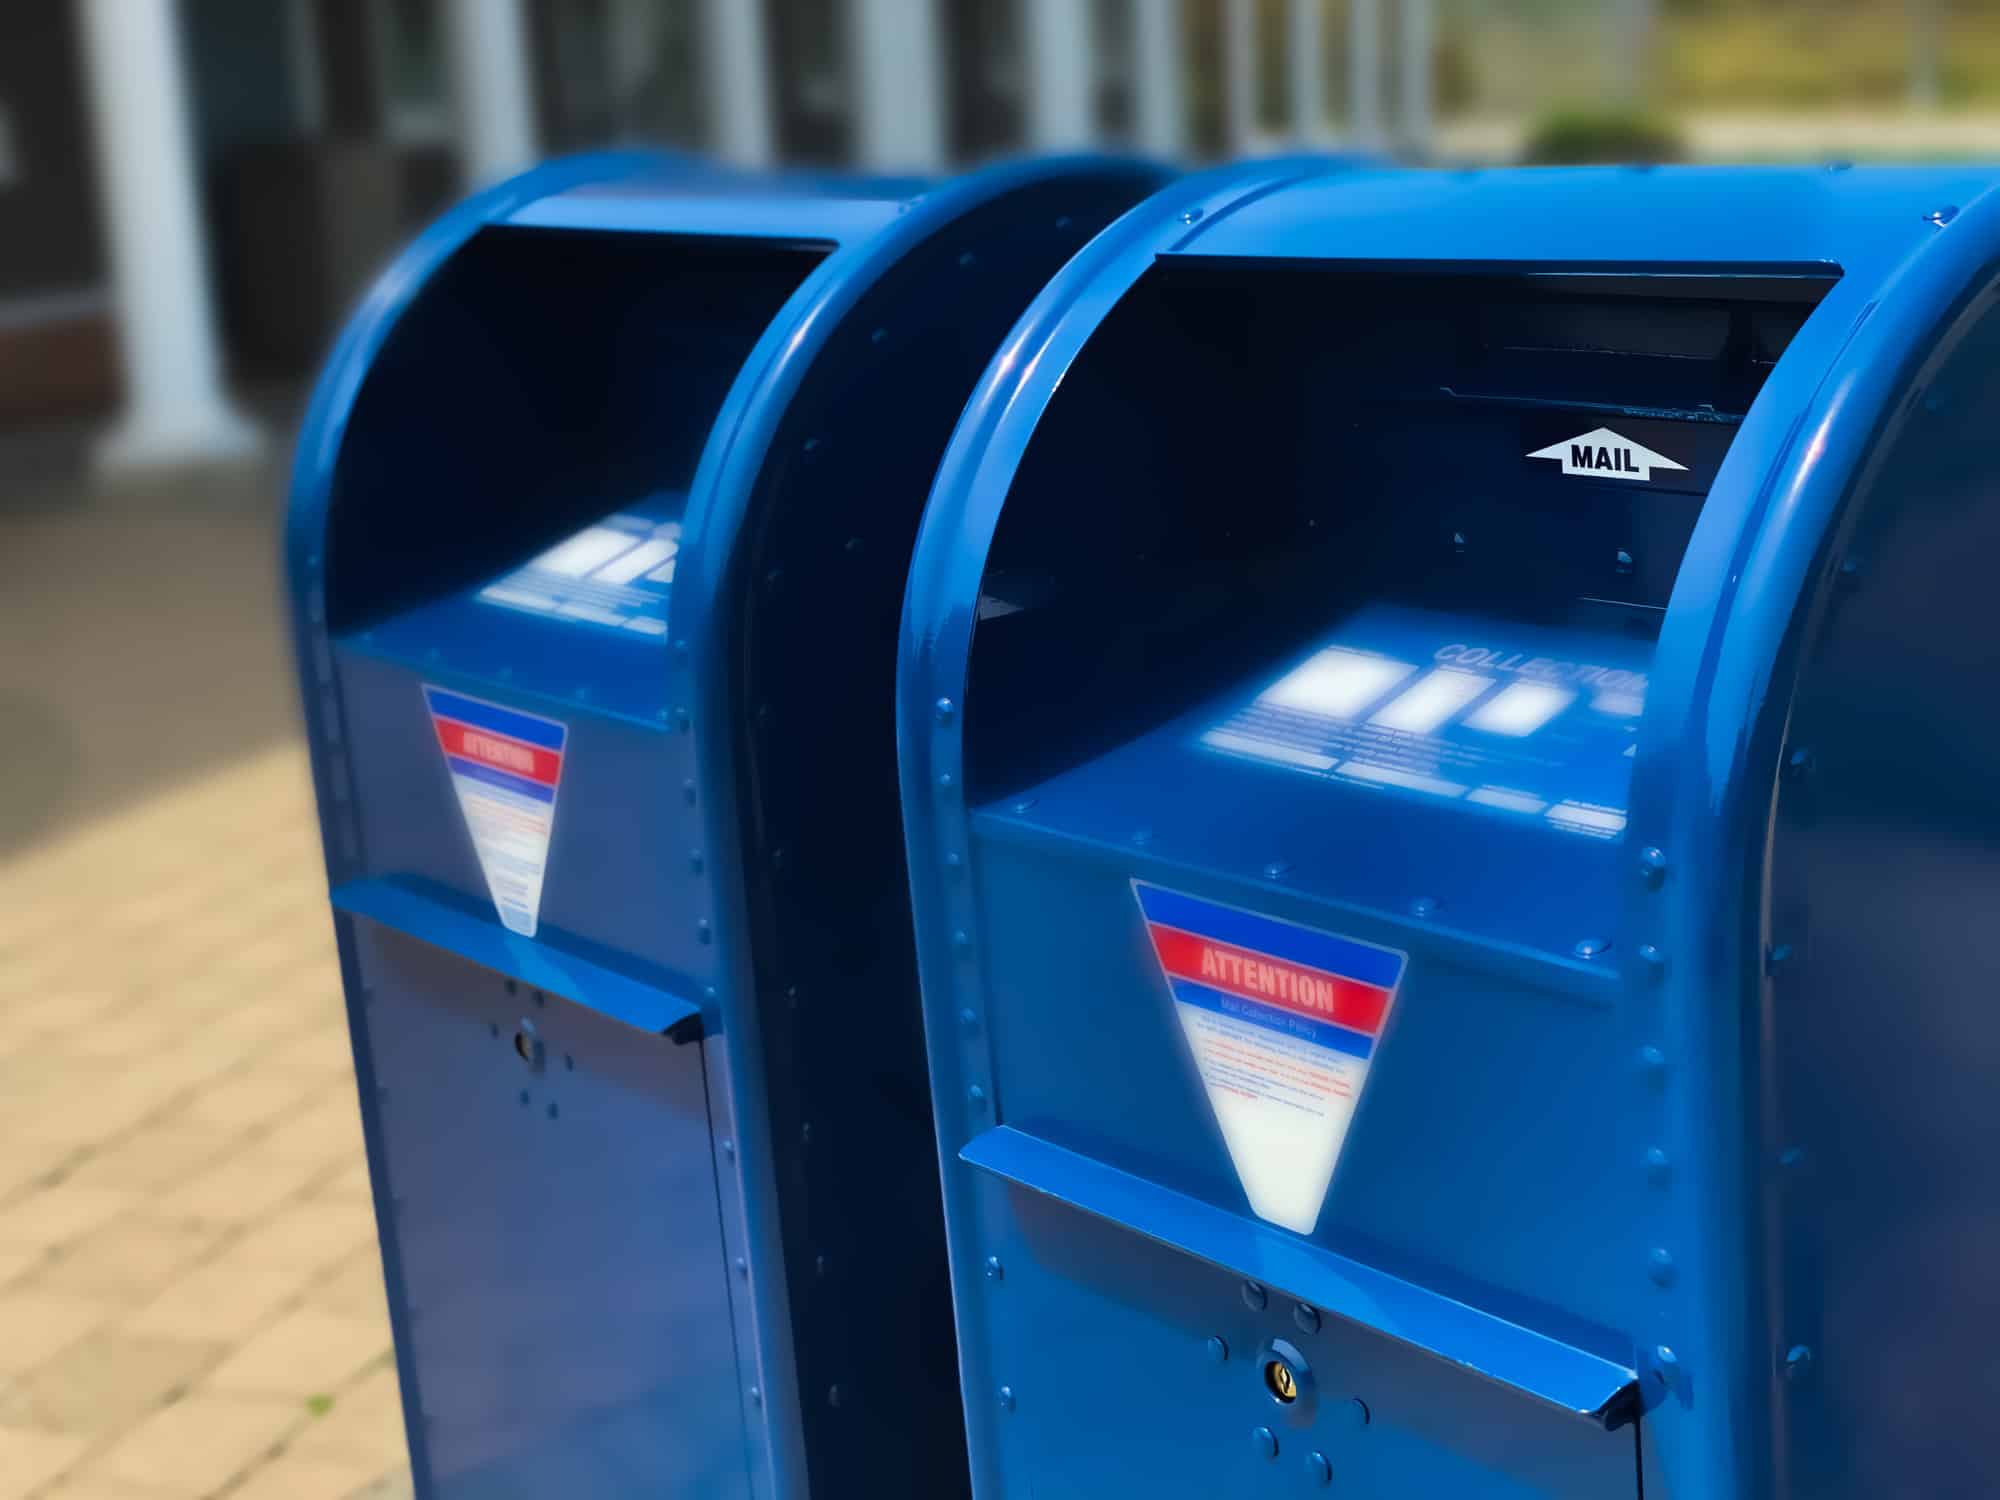 two traditional blue postal mailboxes side by side